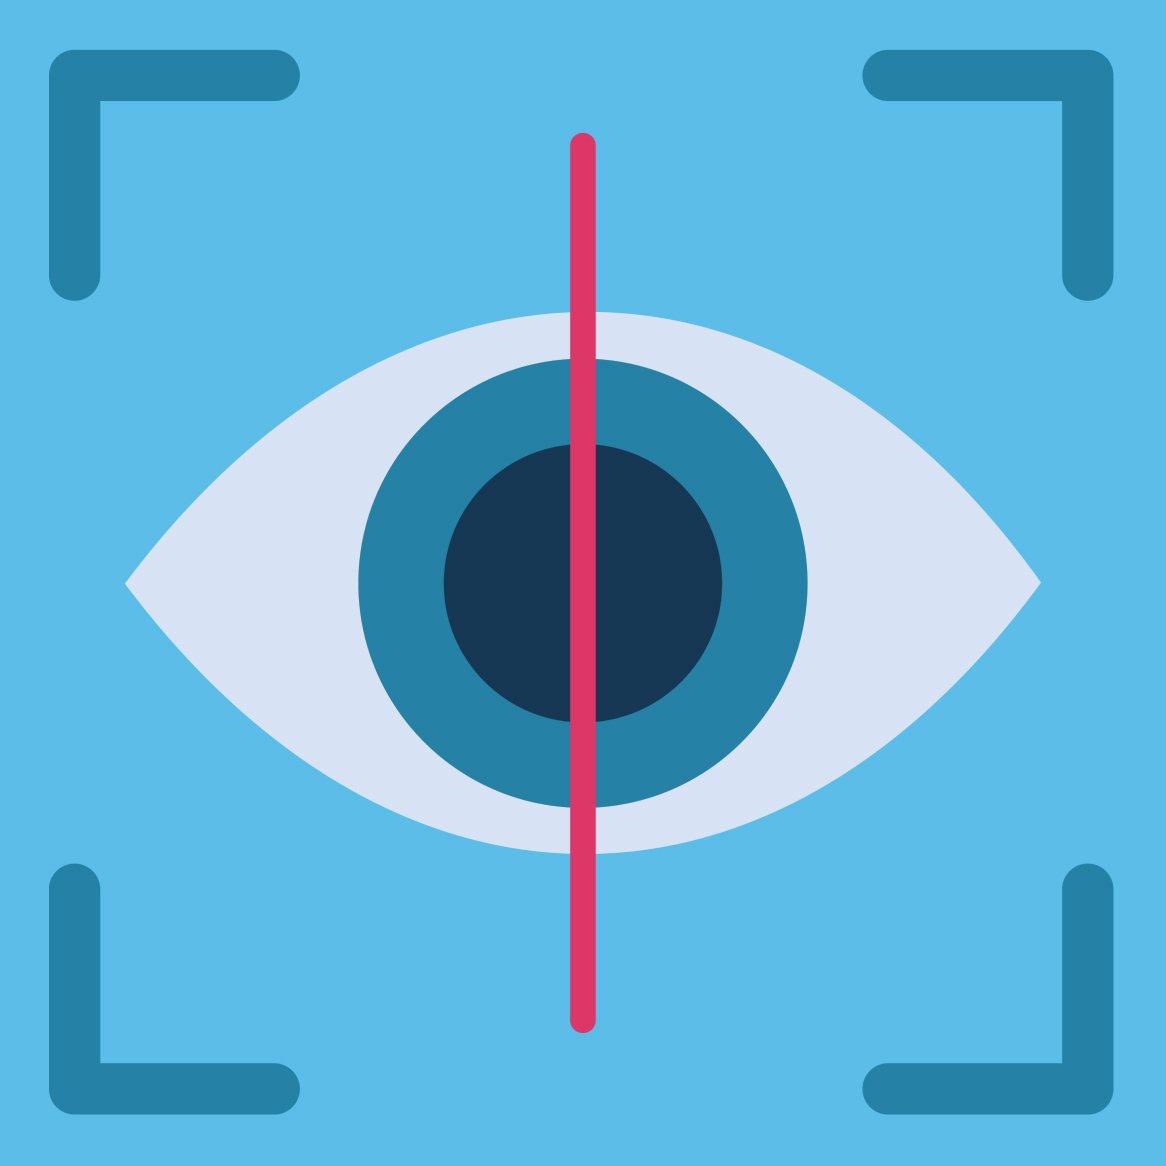 Illustration of an eye being scanned for retinal imaging